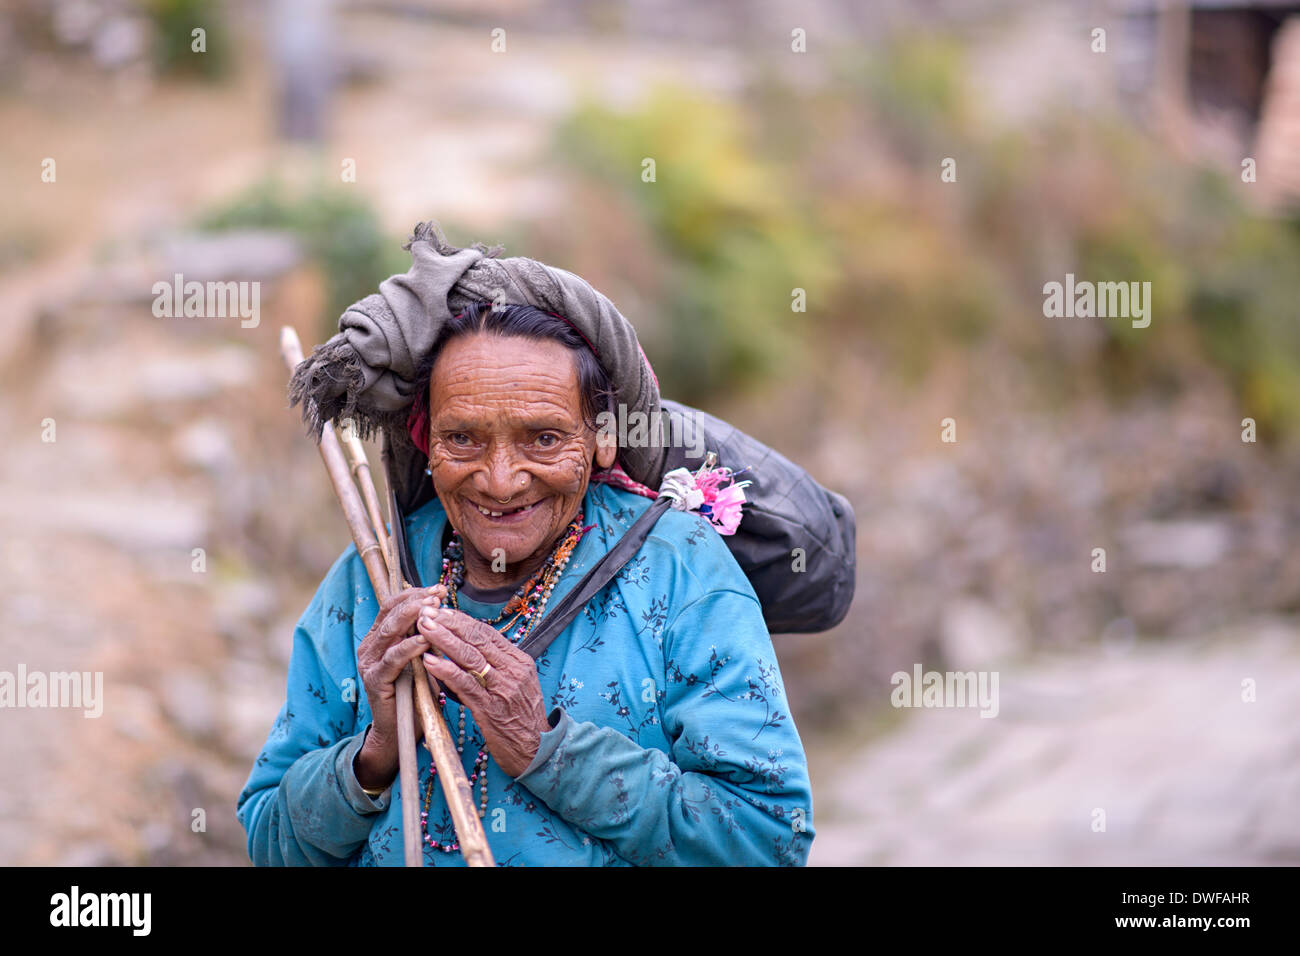 An old smiling nepali woman Stock Photo